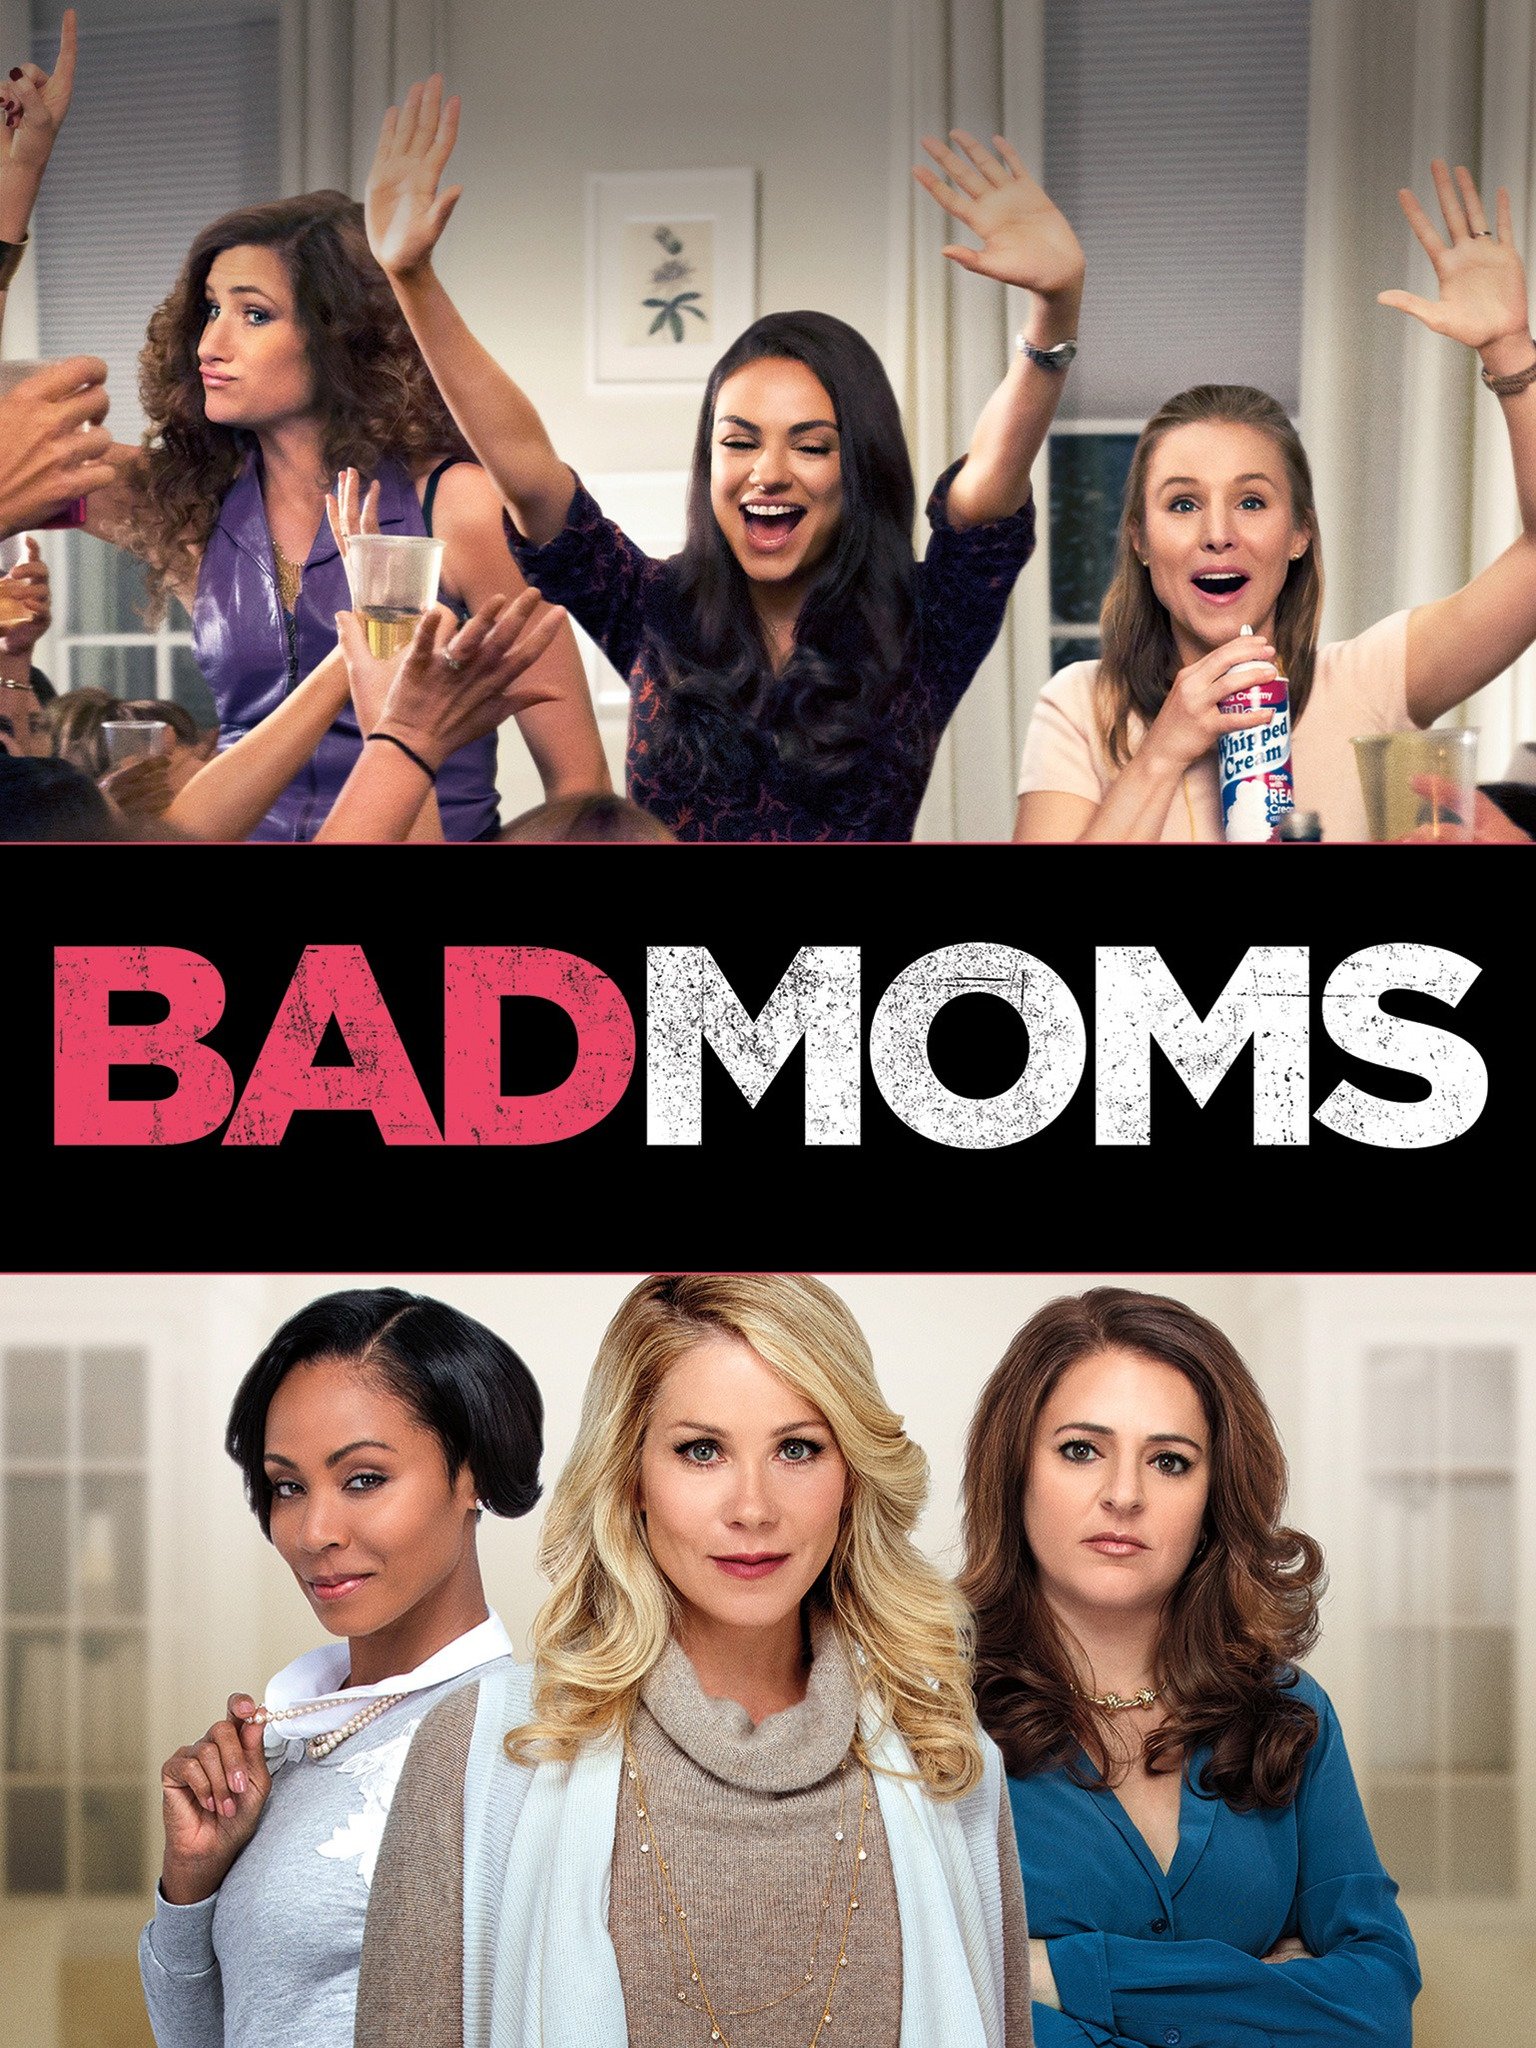 Bad Moms Trailer 2 Trailers And Videos Rotten Tomatoes 3460